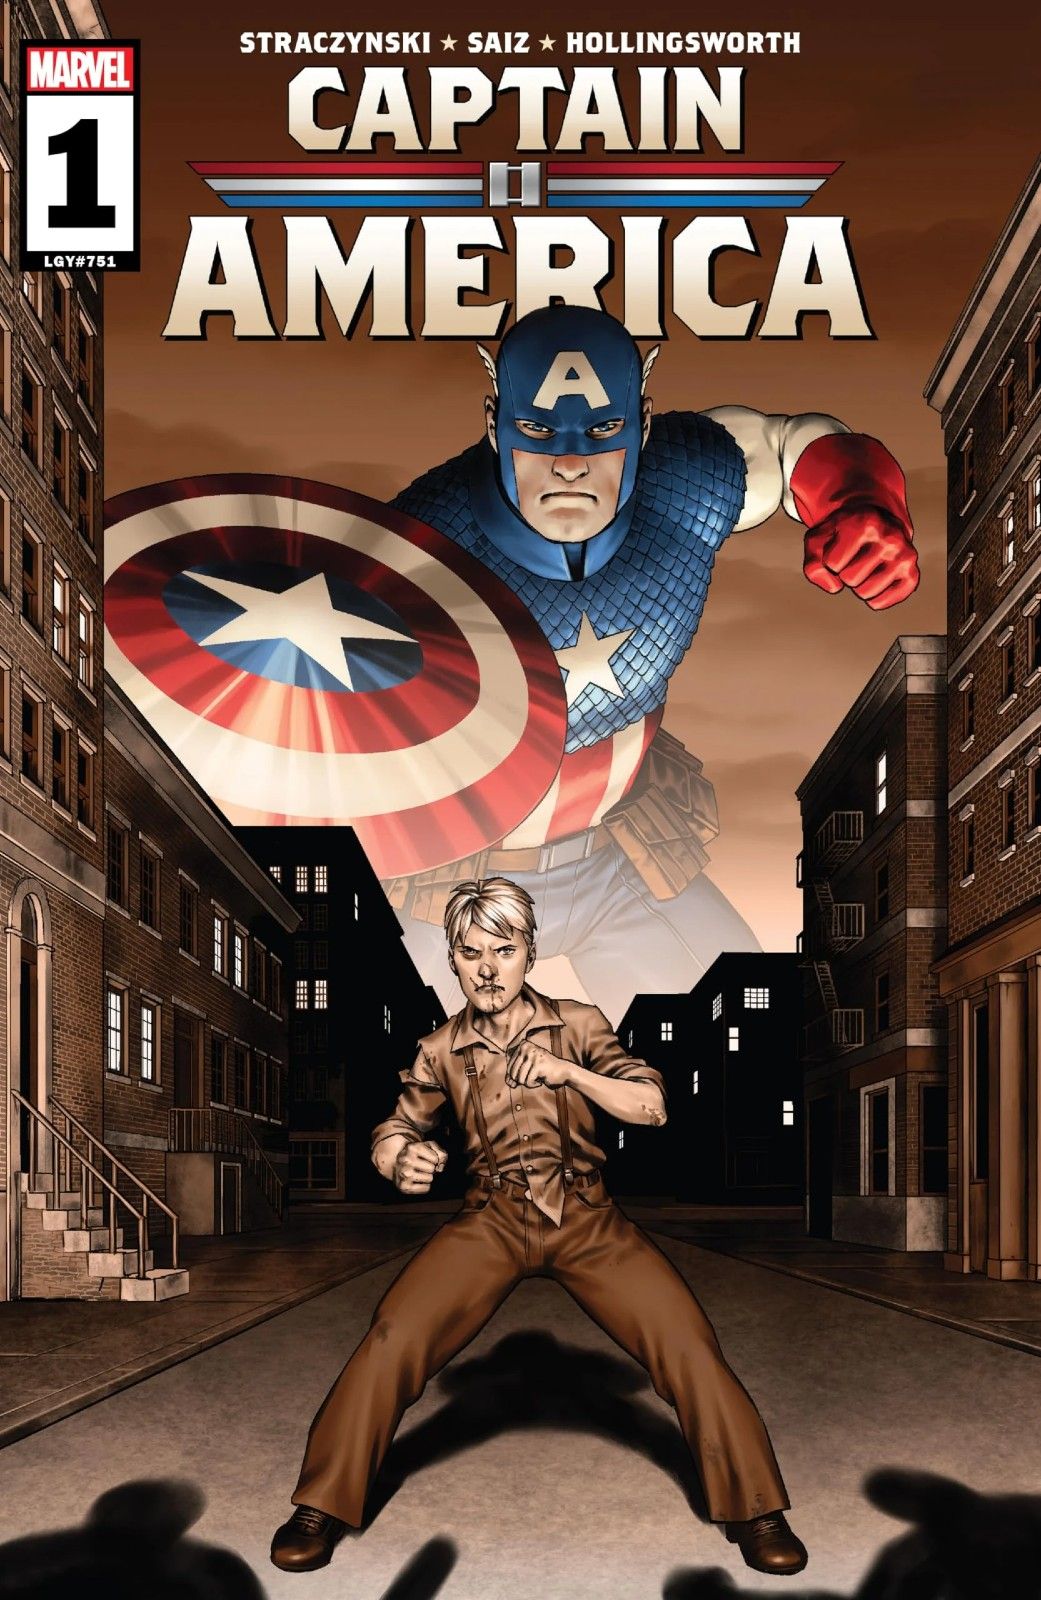 Captain America looks over his young self in Captain America (Vol. 11) #1 by Marvel